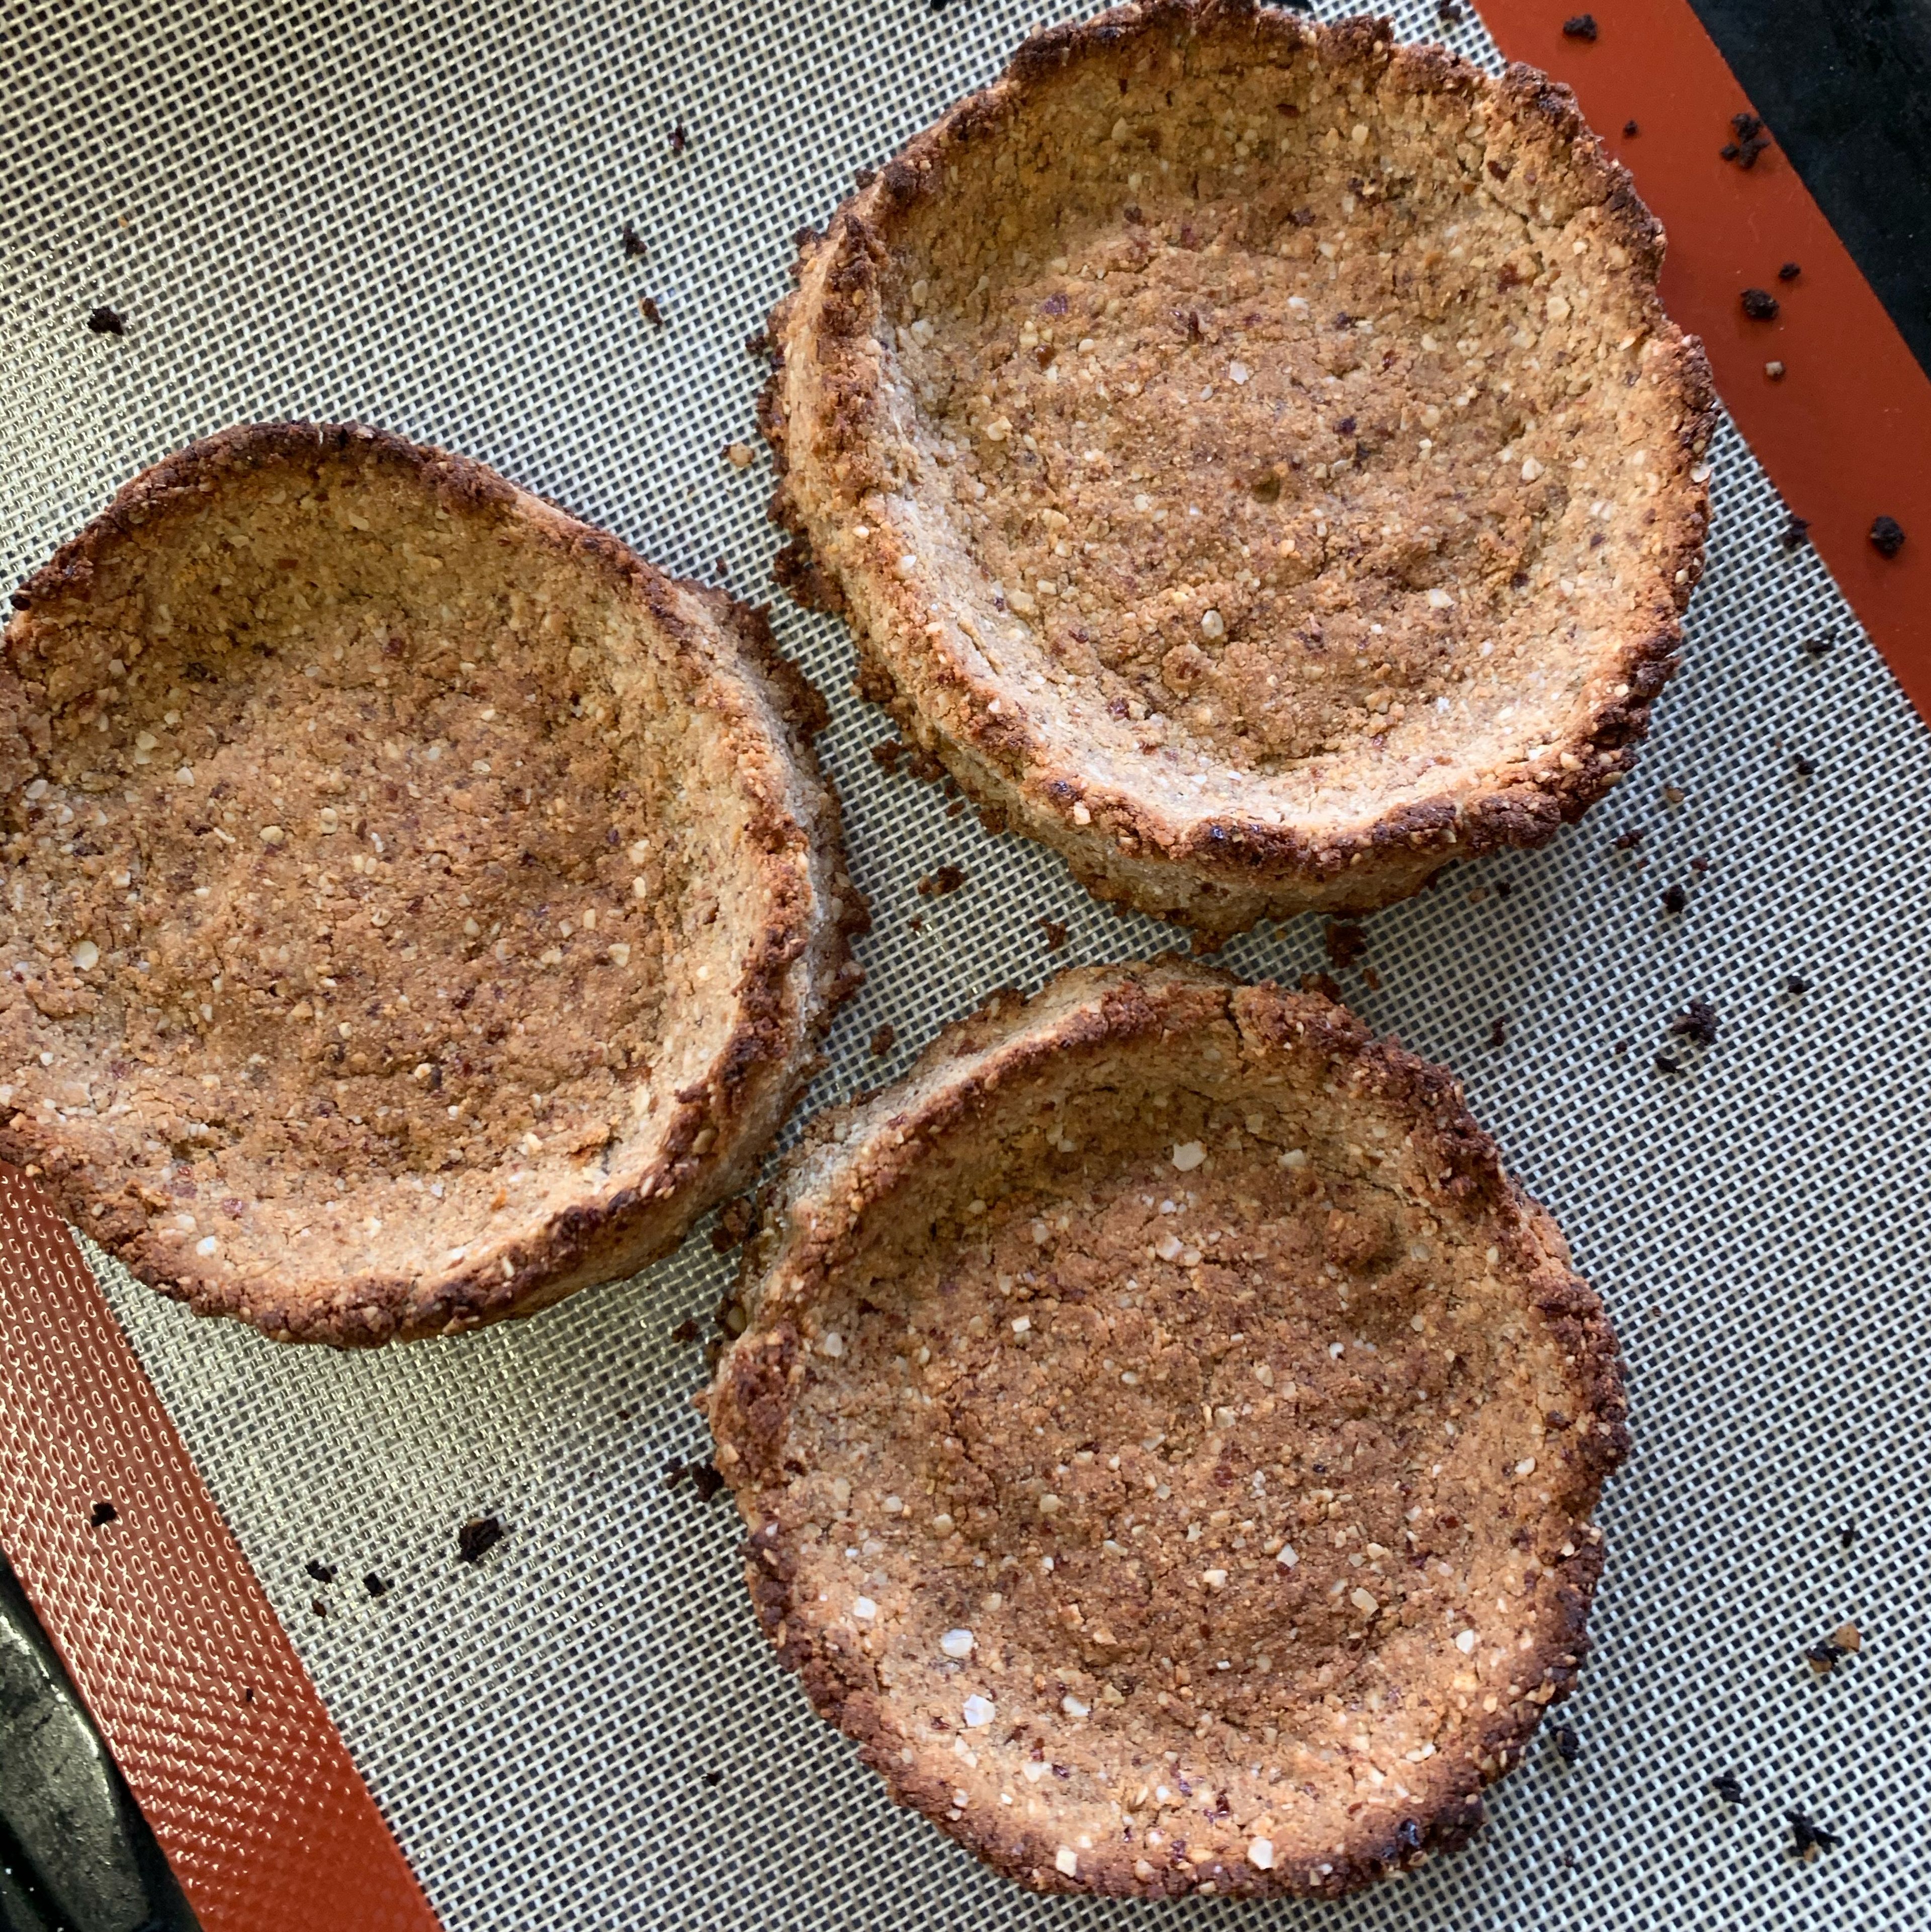 Put the little tarts in the middle of the oven for 15 minutes until golden brown.